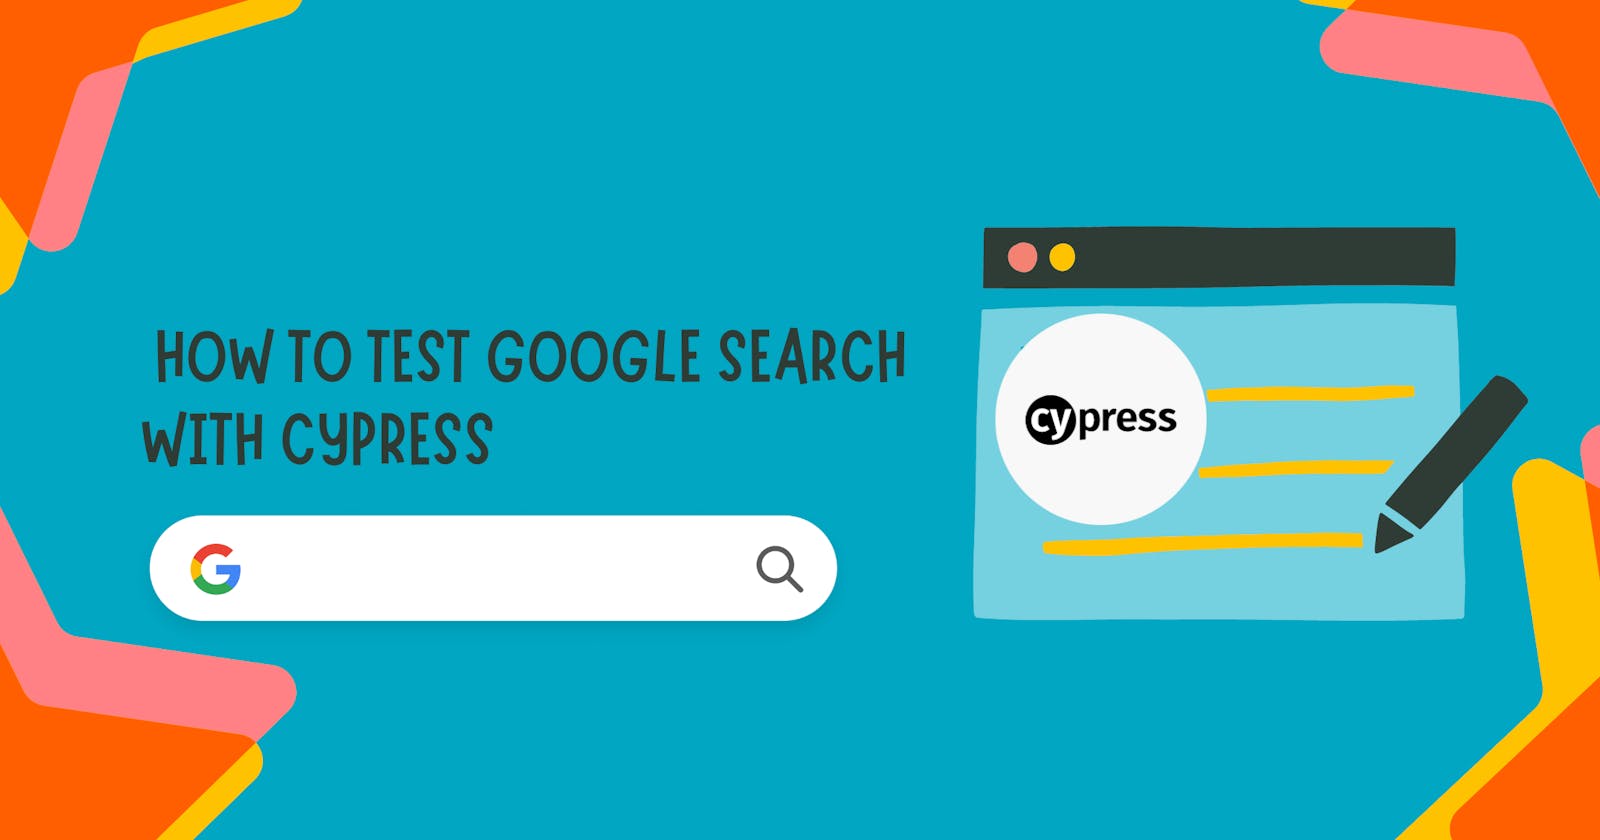 🧪 How to Test Google Search with Cypress 🕵️‍♀️